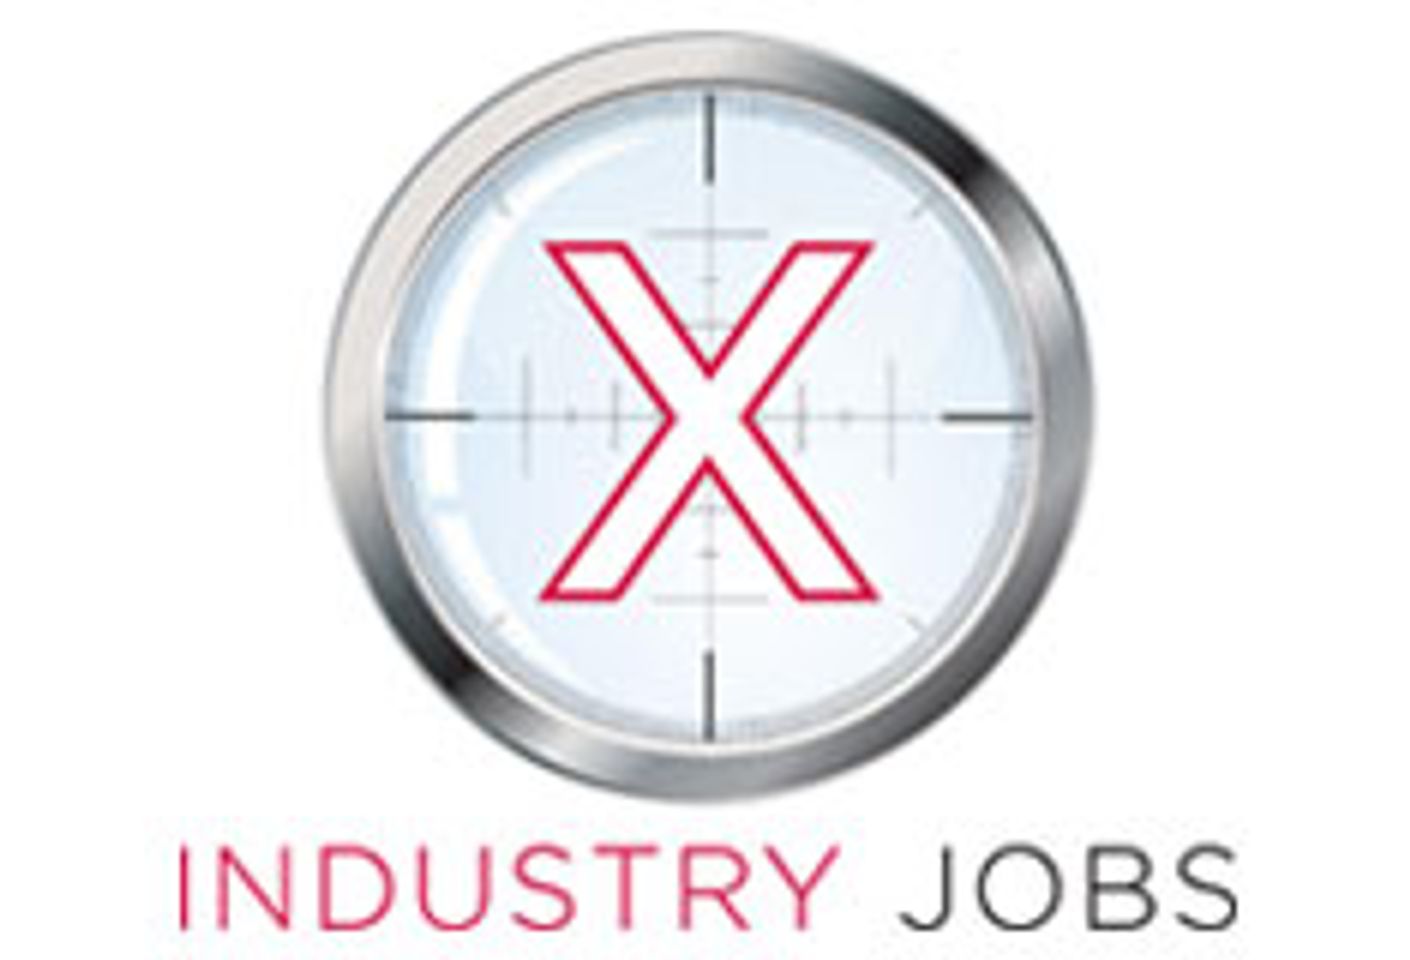 XIndustryJobs.info Taps Jenni Dahling as VP of Recruitment and Marketing